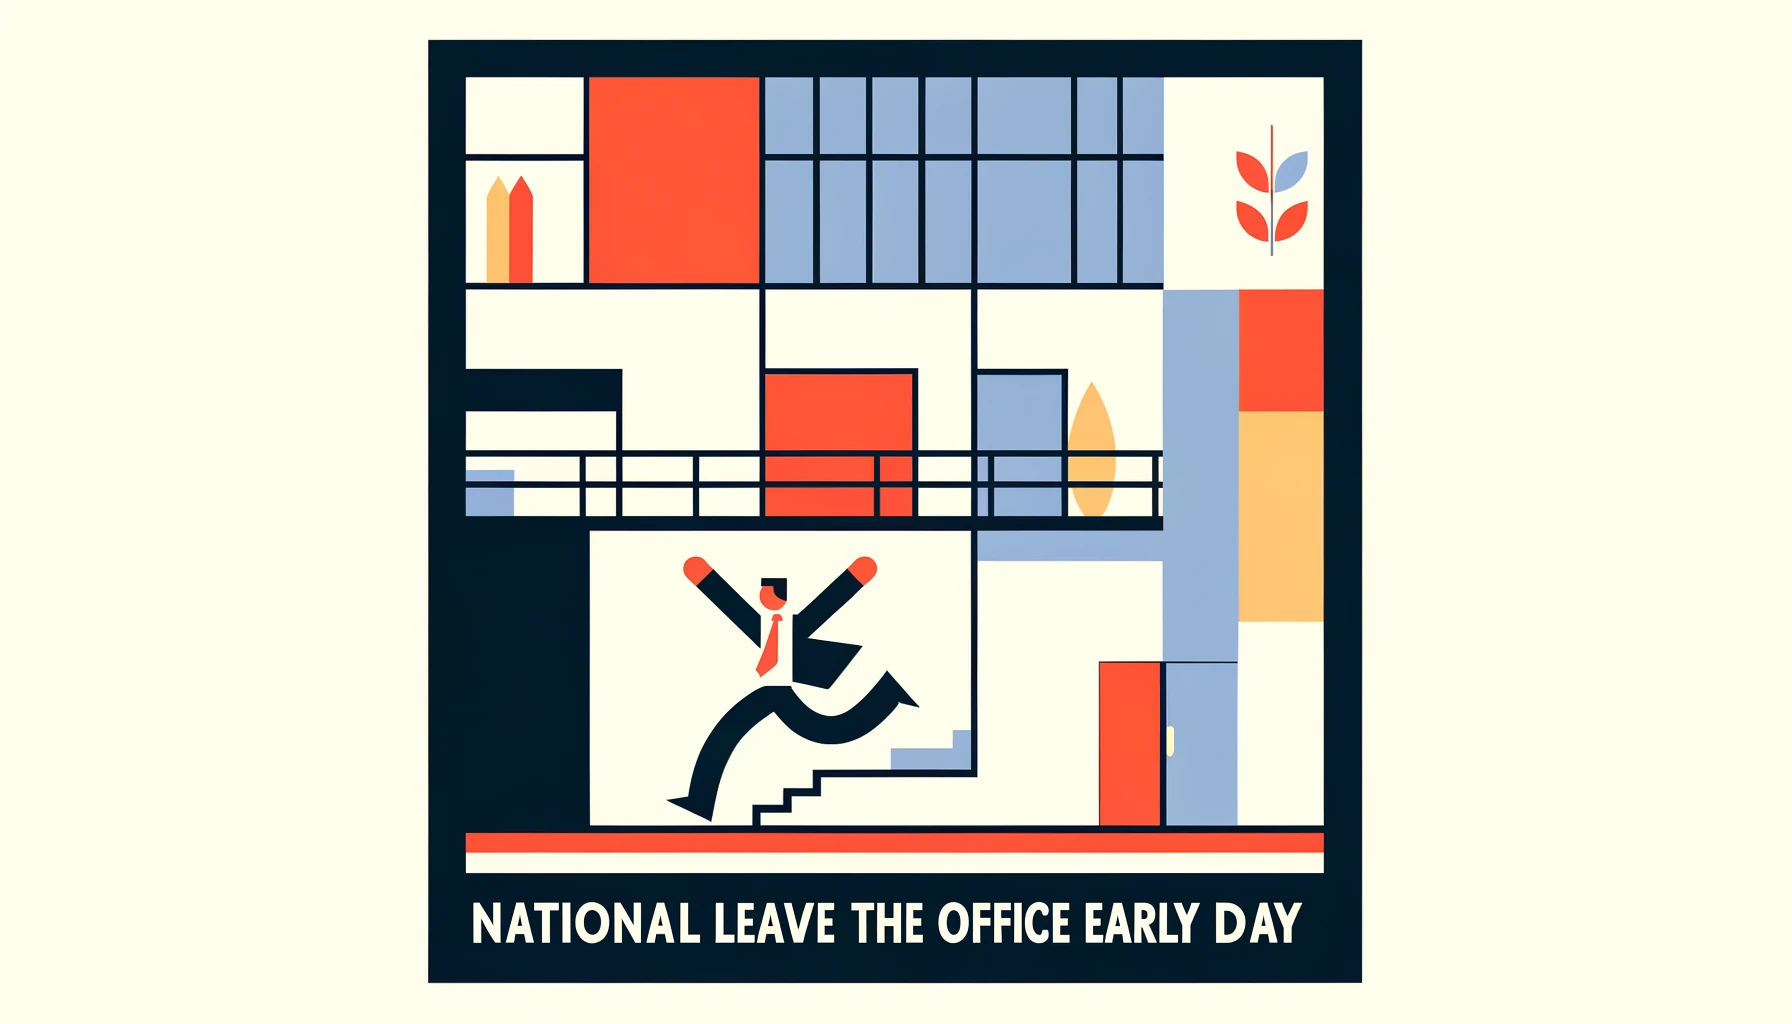 Send Off Your Team with These Leave The Office Early Day Greetings